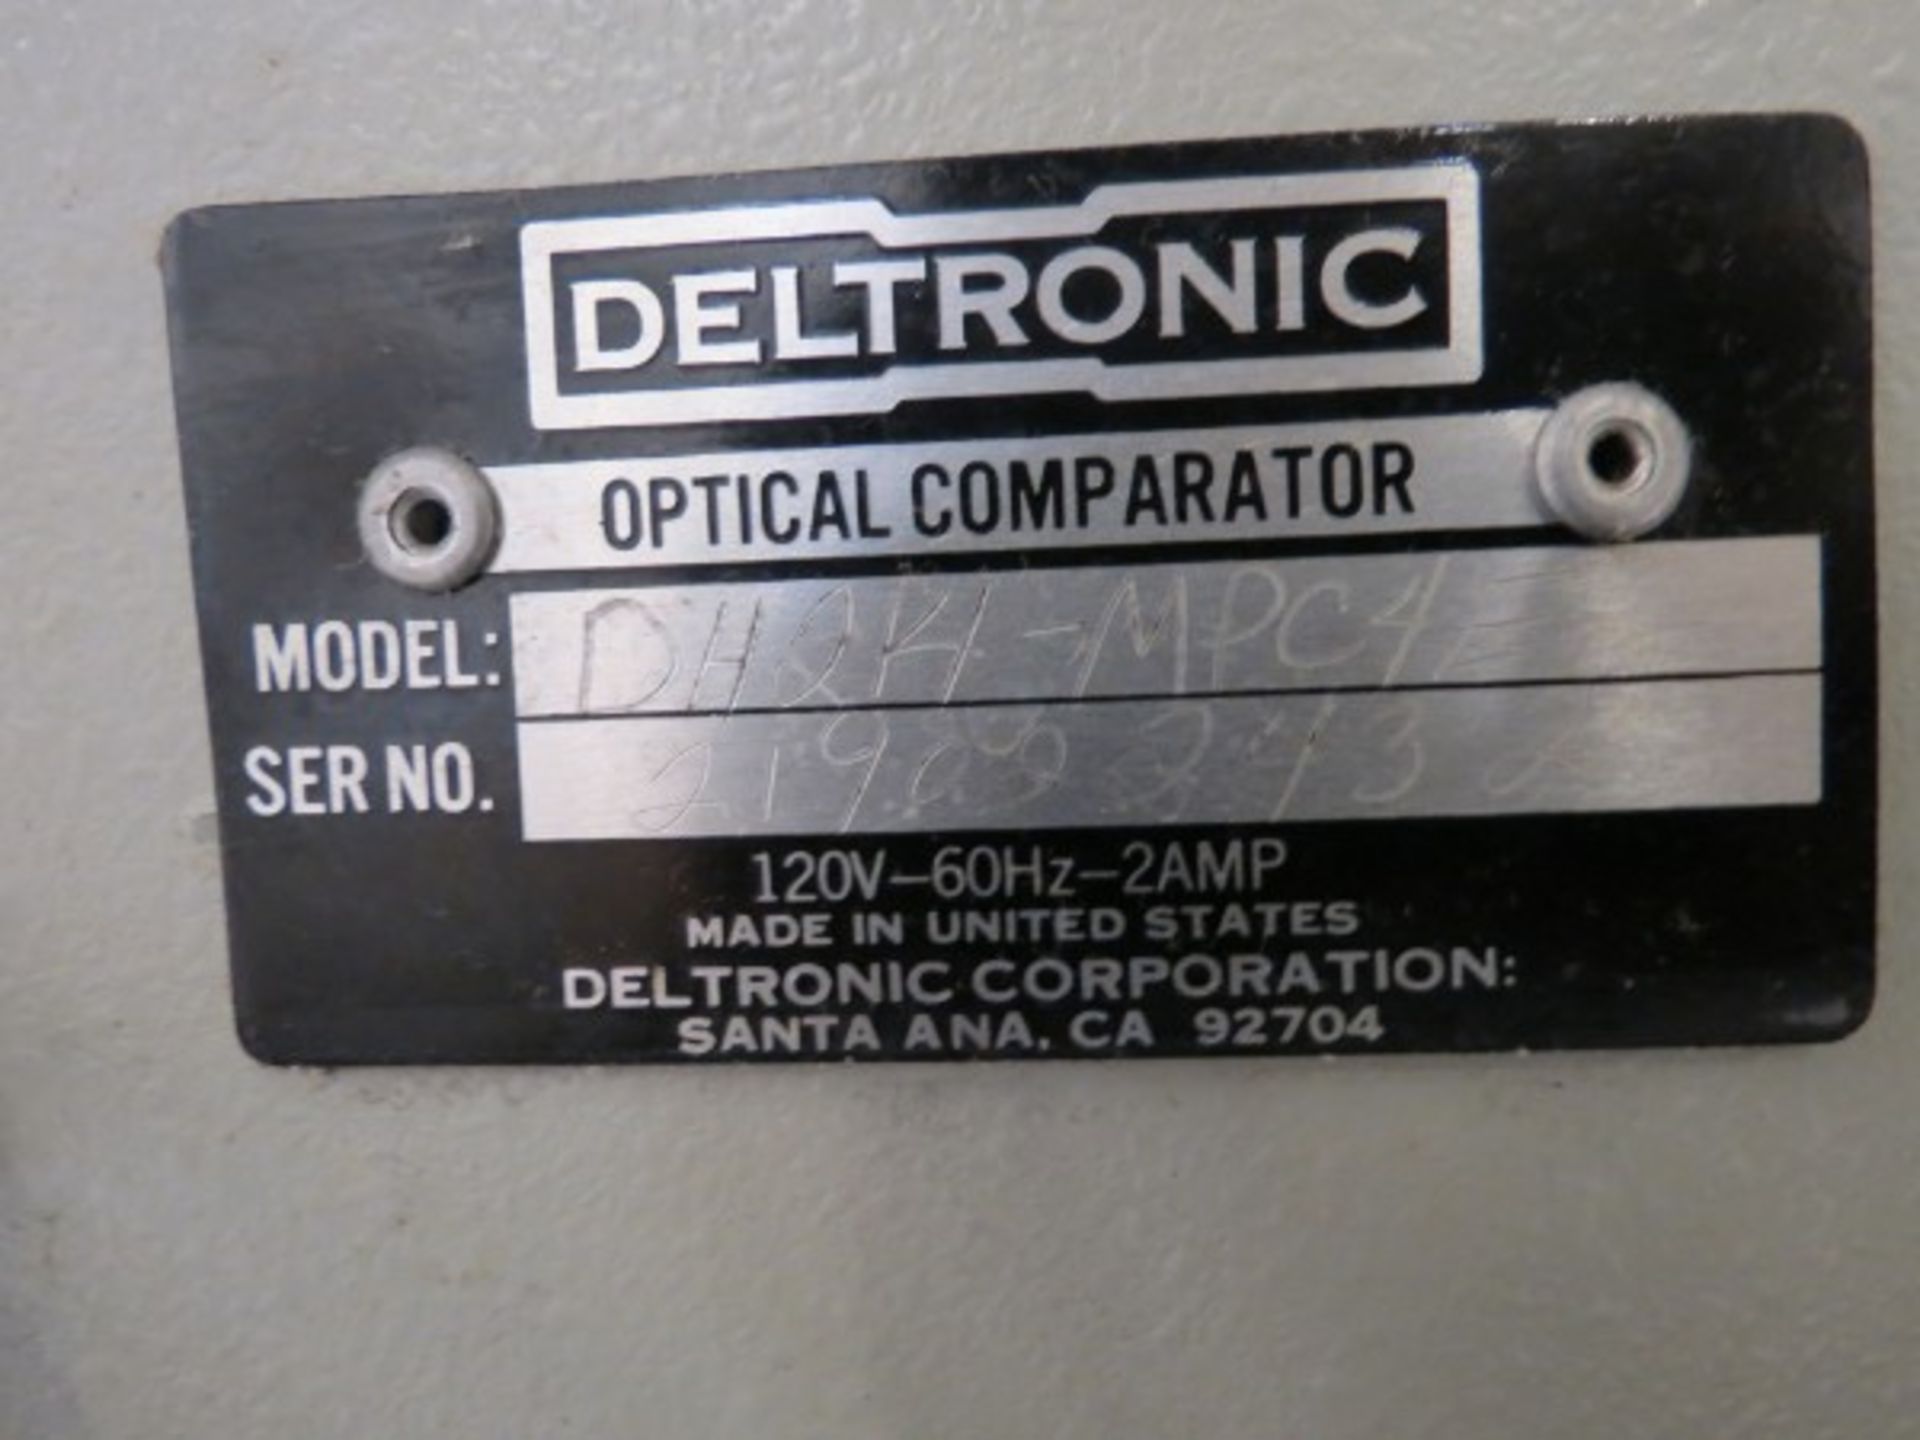 Deltronic DH214 14" Comparator, 50x magnifying lens, with DRO, S/N 219022432 - Image 5 of 5